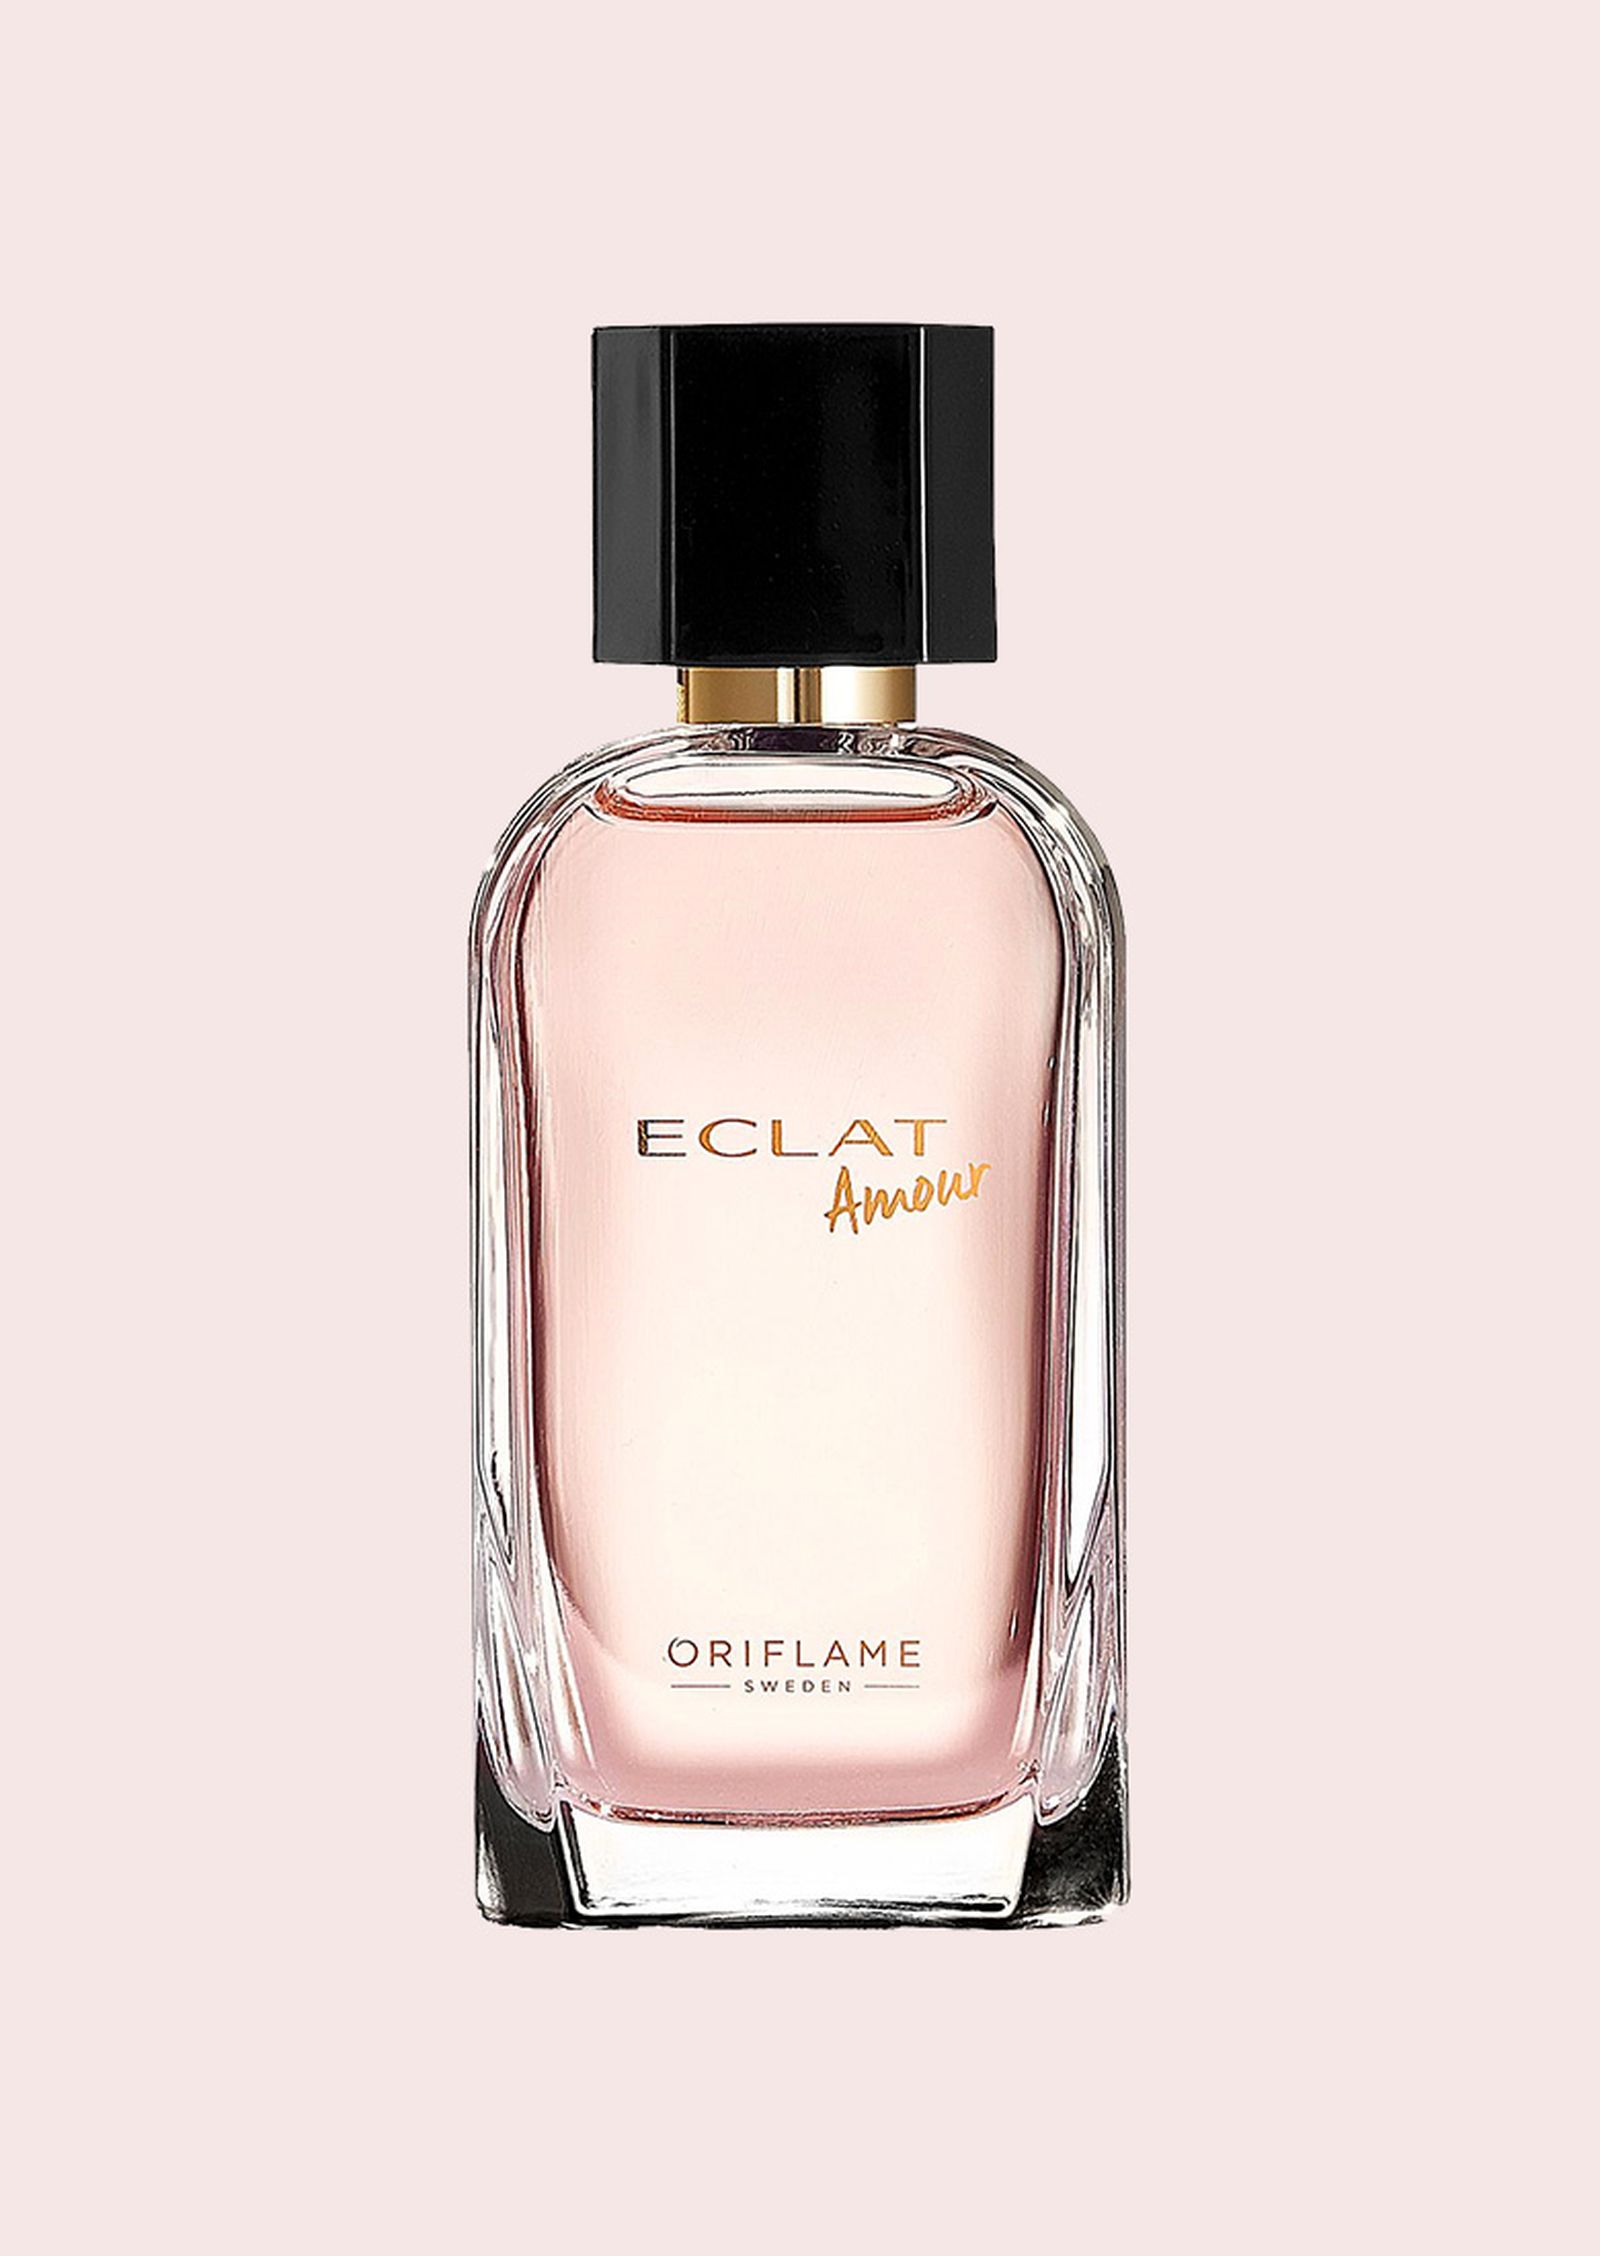 Oriflame, Eclat Amour